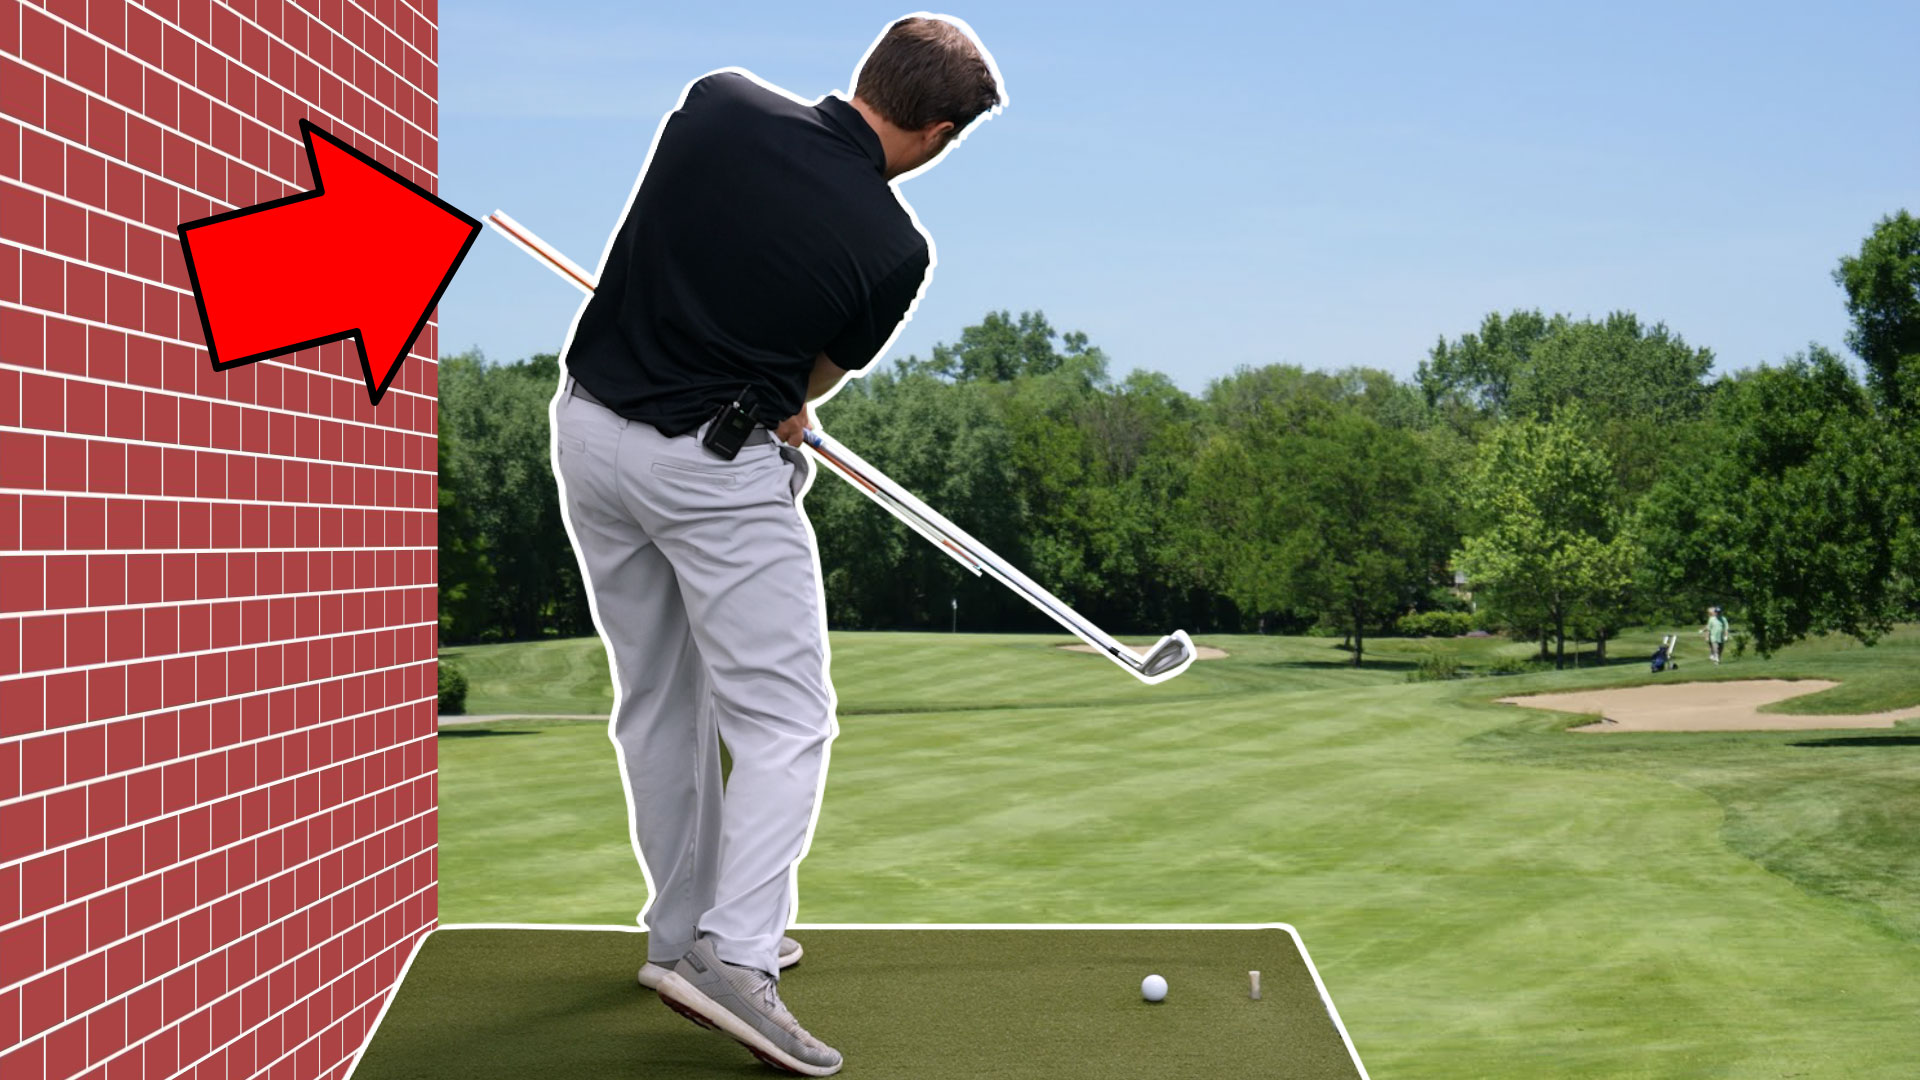 One Feel to Release Golf Club Like a Pro | Stab the Wall • Top Speed Golf